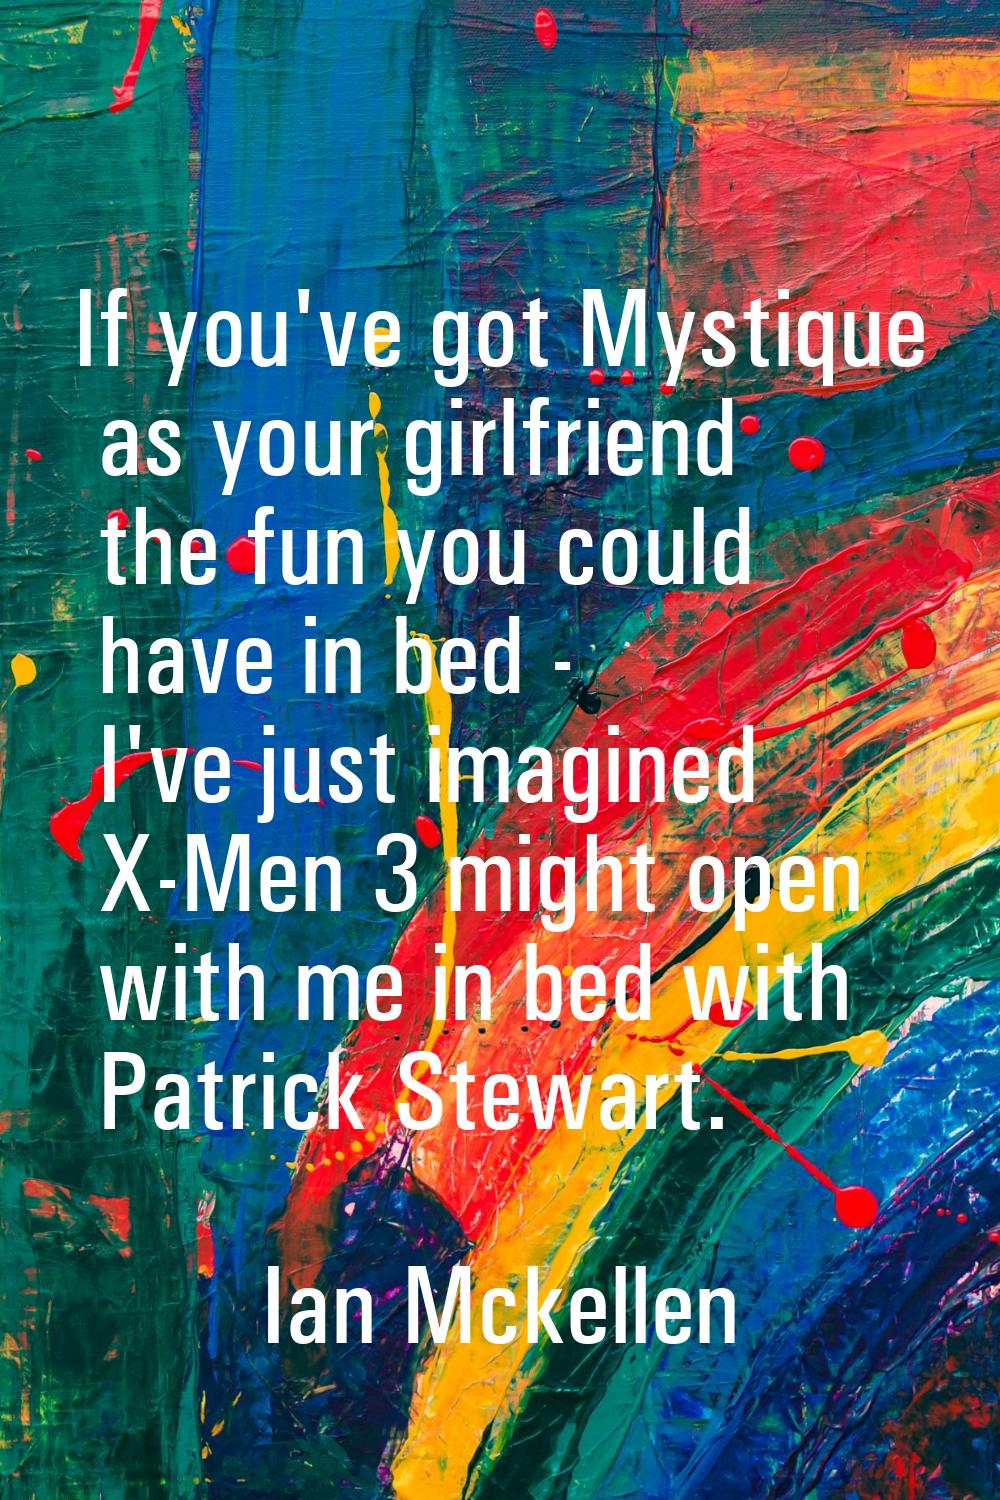 If you've got Mystique as your girlfriend the fun you could have in bed - I've just imagined X-Men 